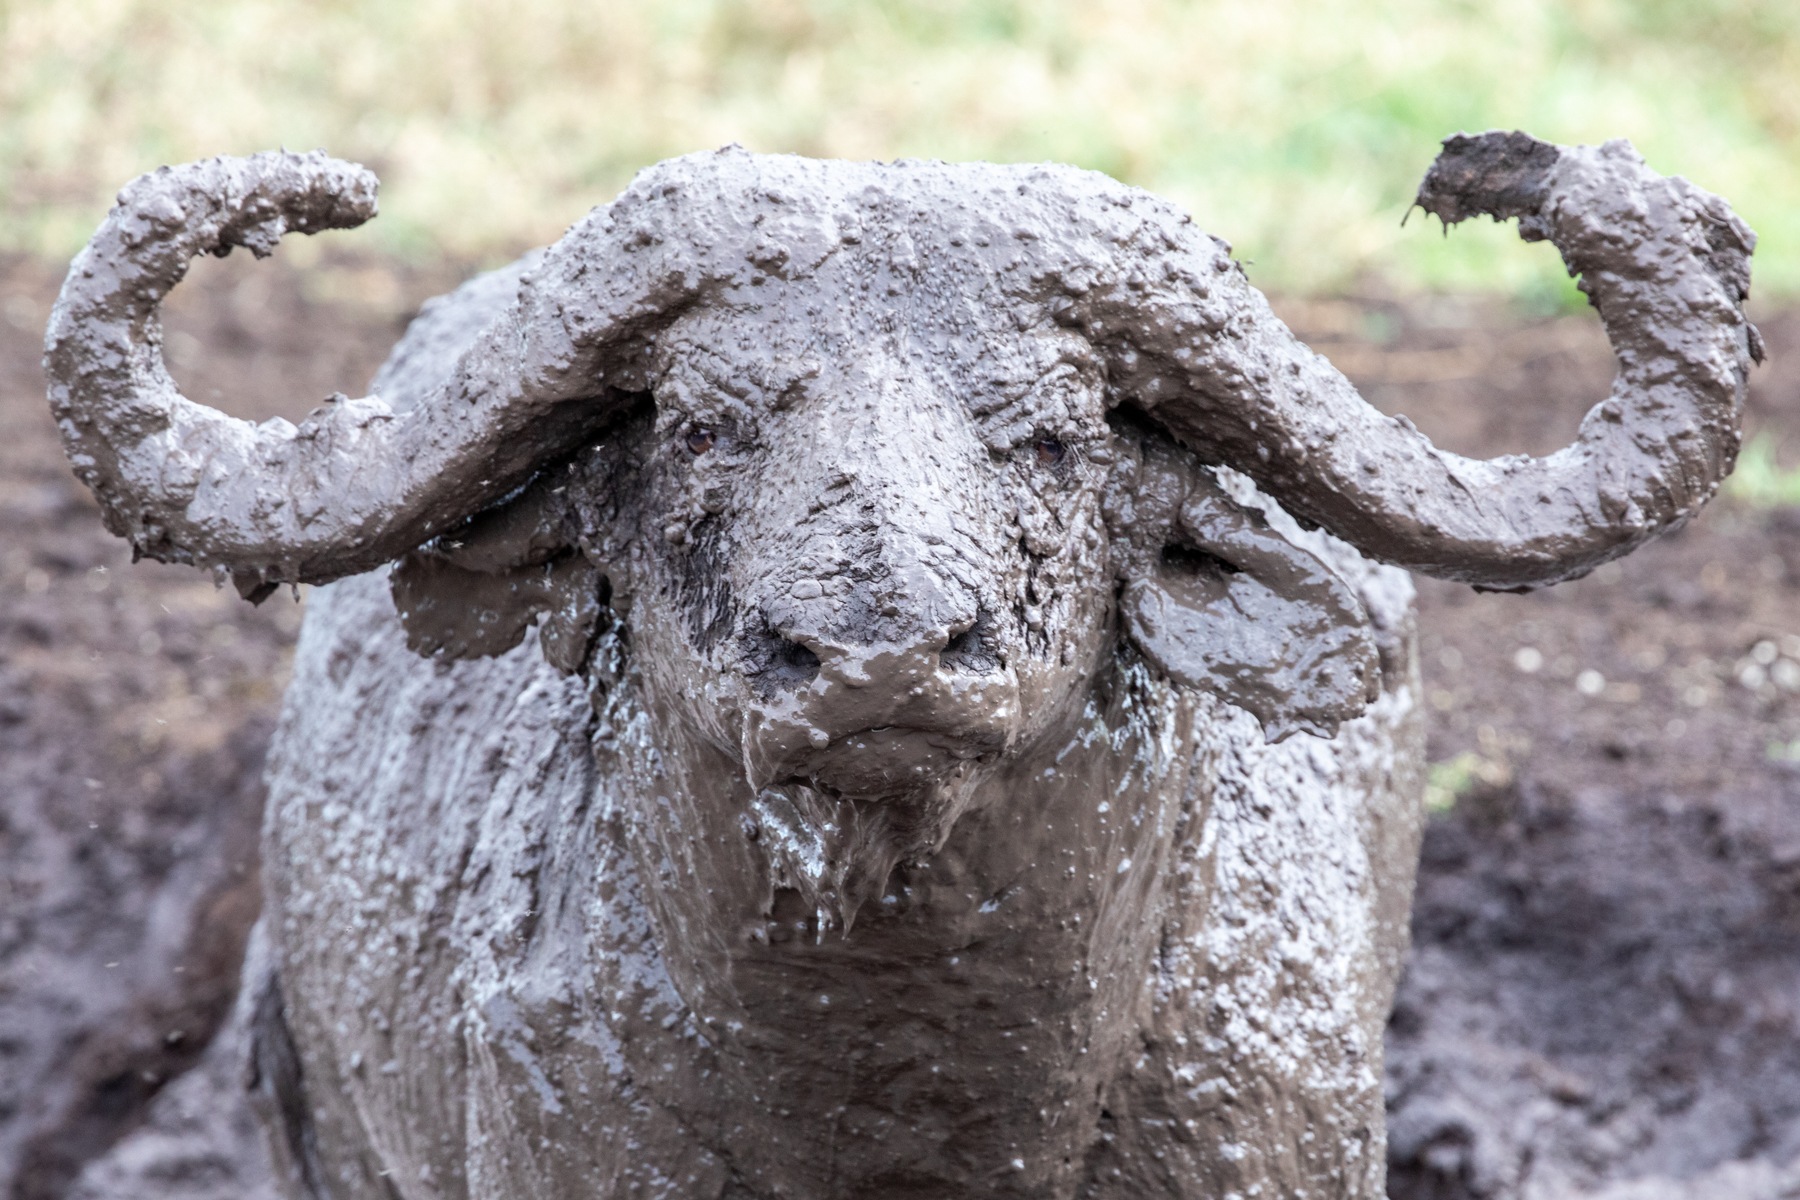 Covered in mud but with eyes wide open, an elderly African Buffalo gets up from his mud bath in Ngorongoro